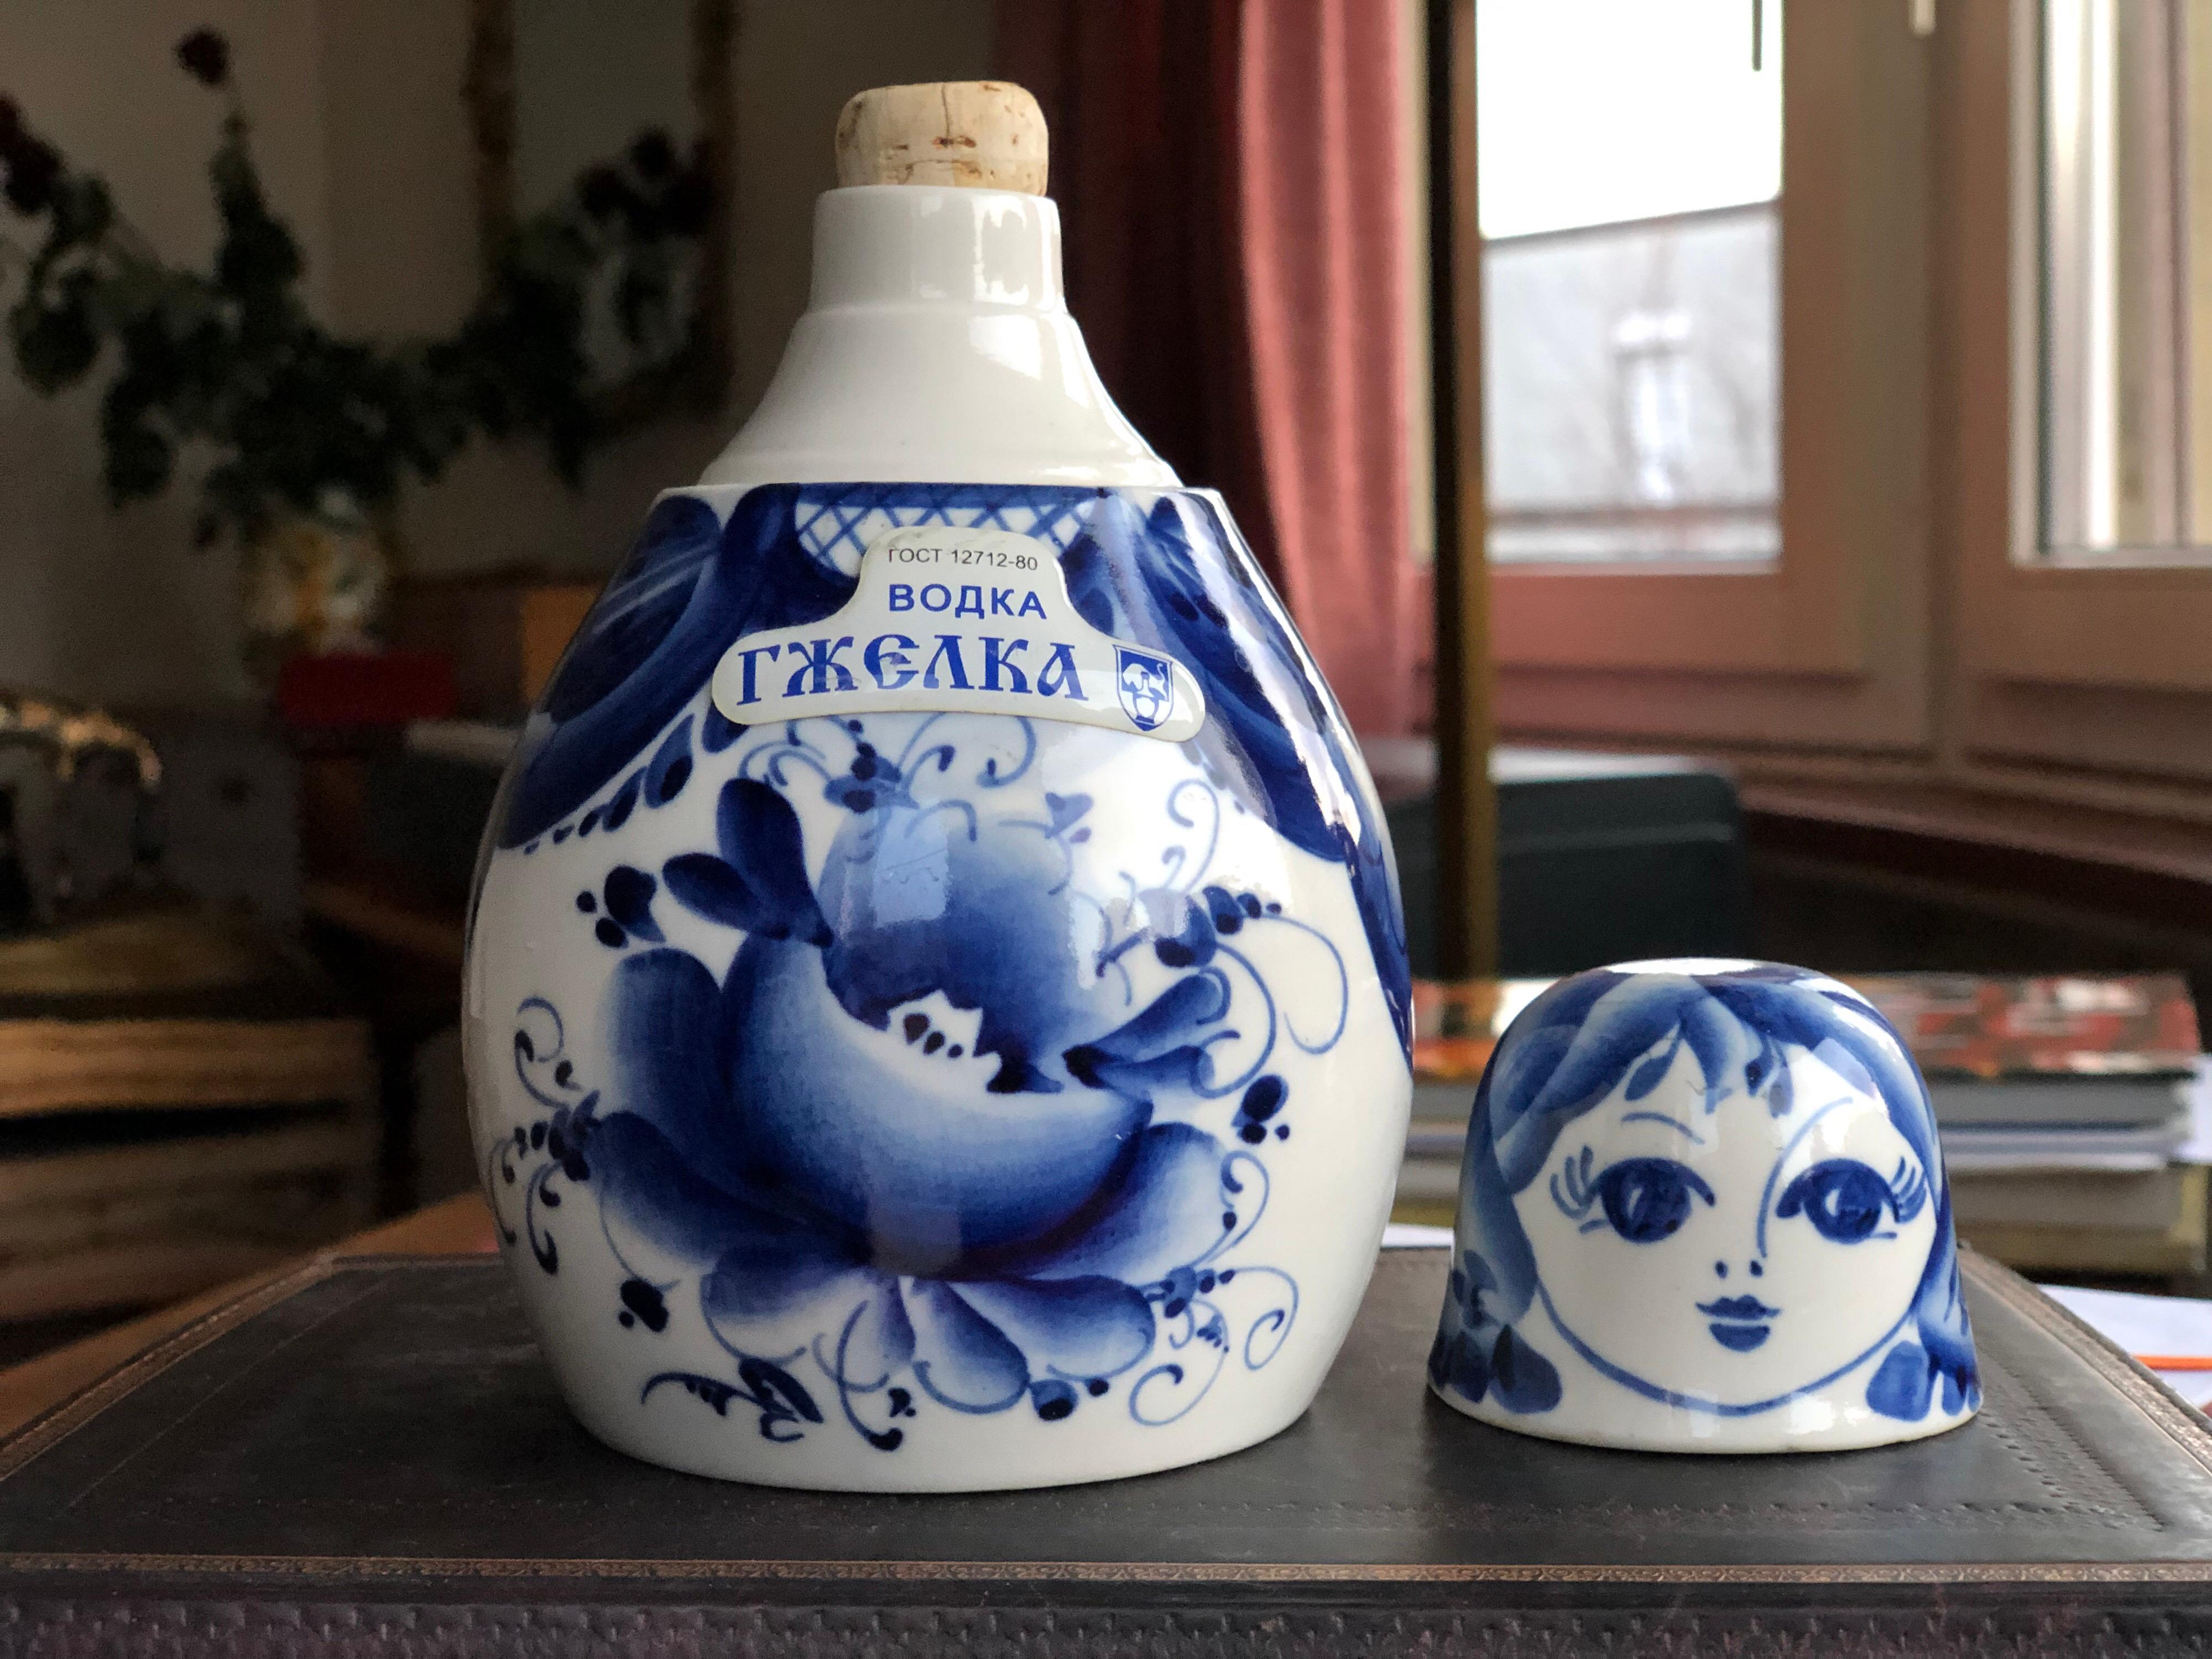 Gzhel is a Russian style of blue and white ceramics which takes its name from the village of Gzhel and surrounding area, where it has been produced since 1802.

About thirty villages located southeast of Moscow produce pottery and ship it